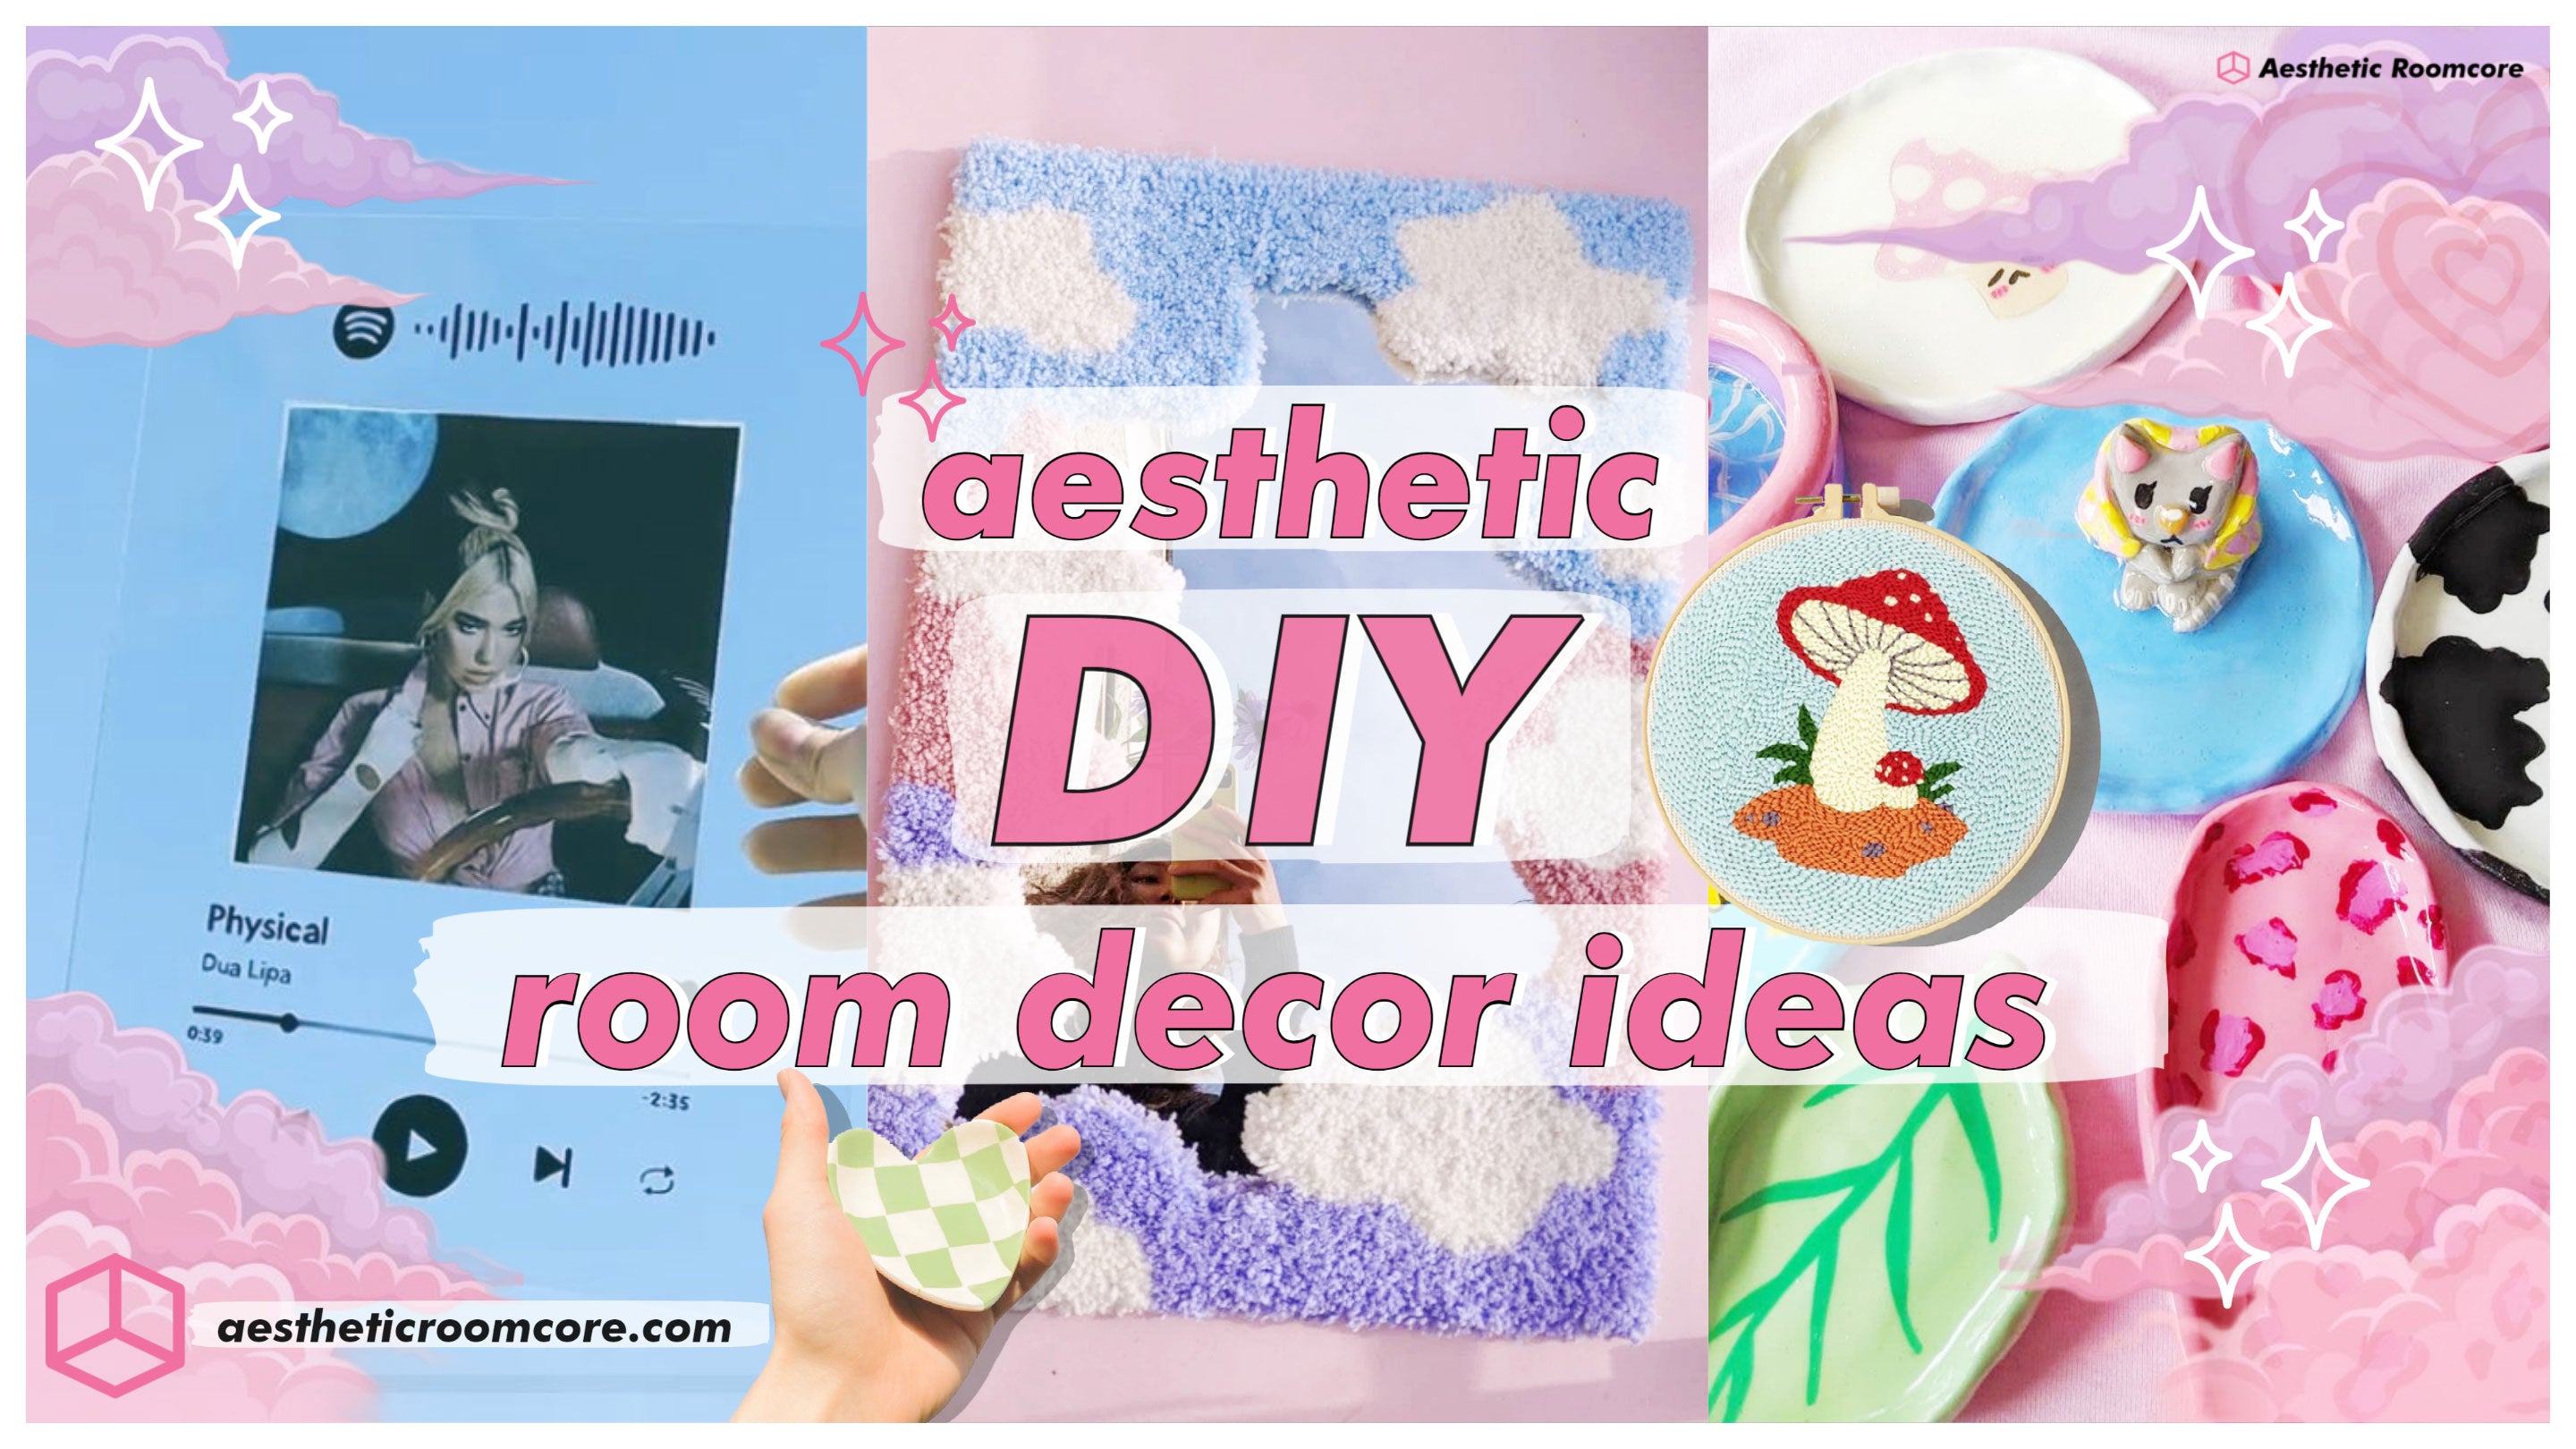 35 Air Dry Clay Projects that will instantly inspire you!